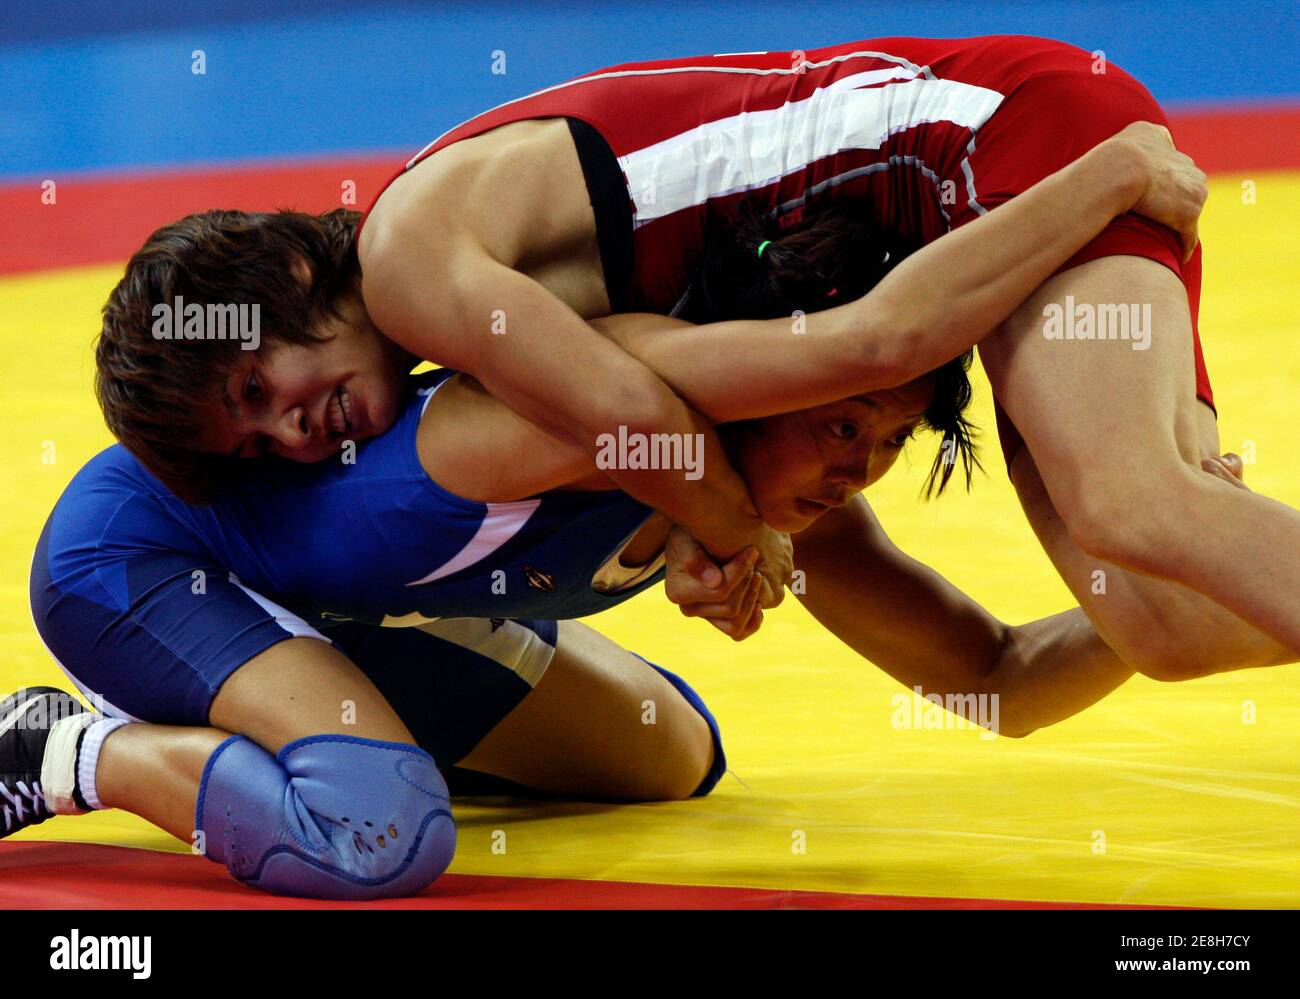 Tatyana Bakatyuk of Kazakhstan  (in red) fights Carol Huynh of Canada during their 48kg  women's semi-final freestyle wrestling match at the Beijing 2008 Olympic Games August 16, 2008.     REUTERS/Oleg Popov (CHINA) Stock Photo